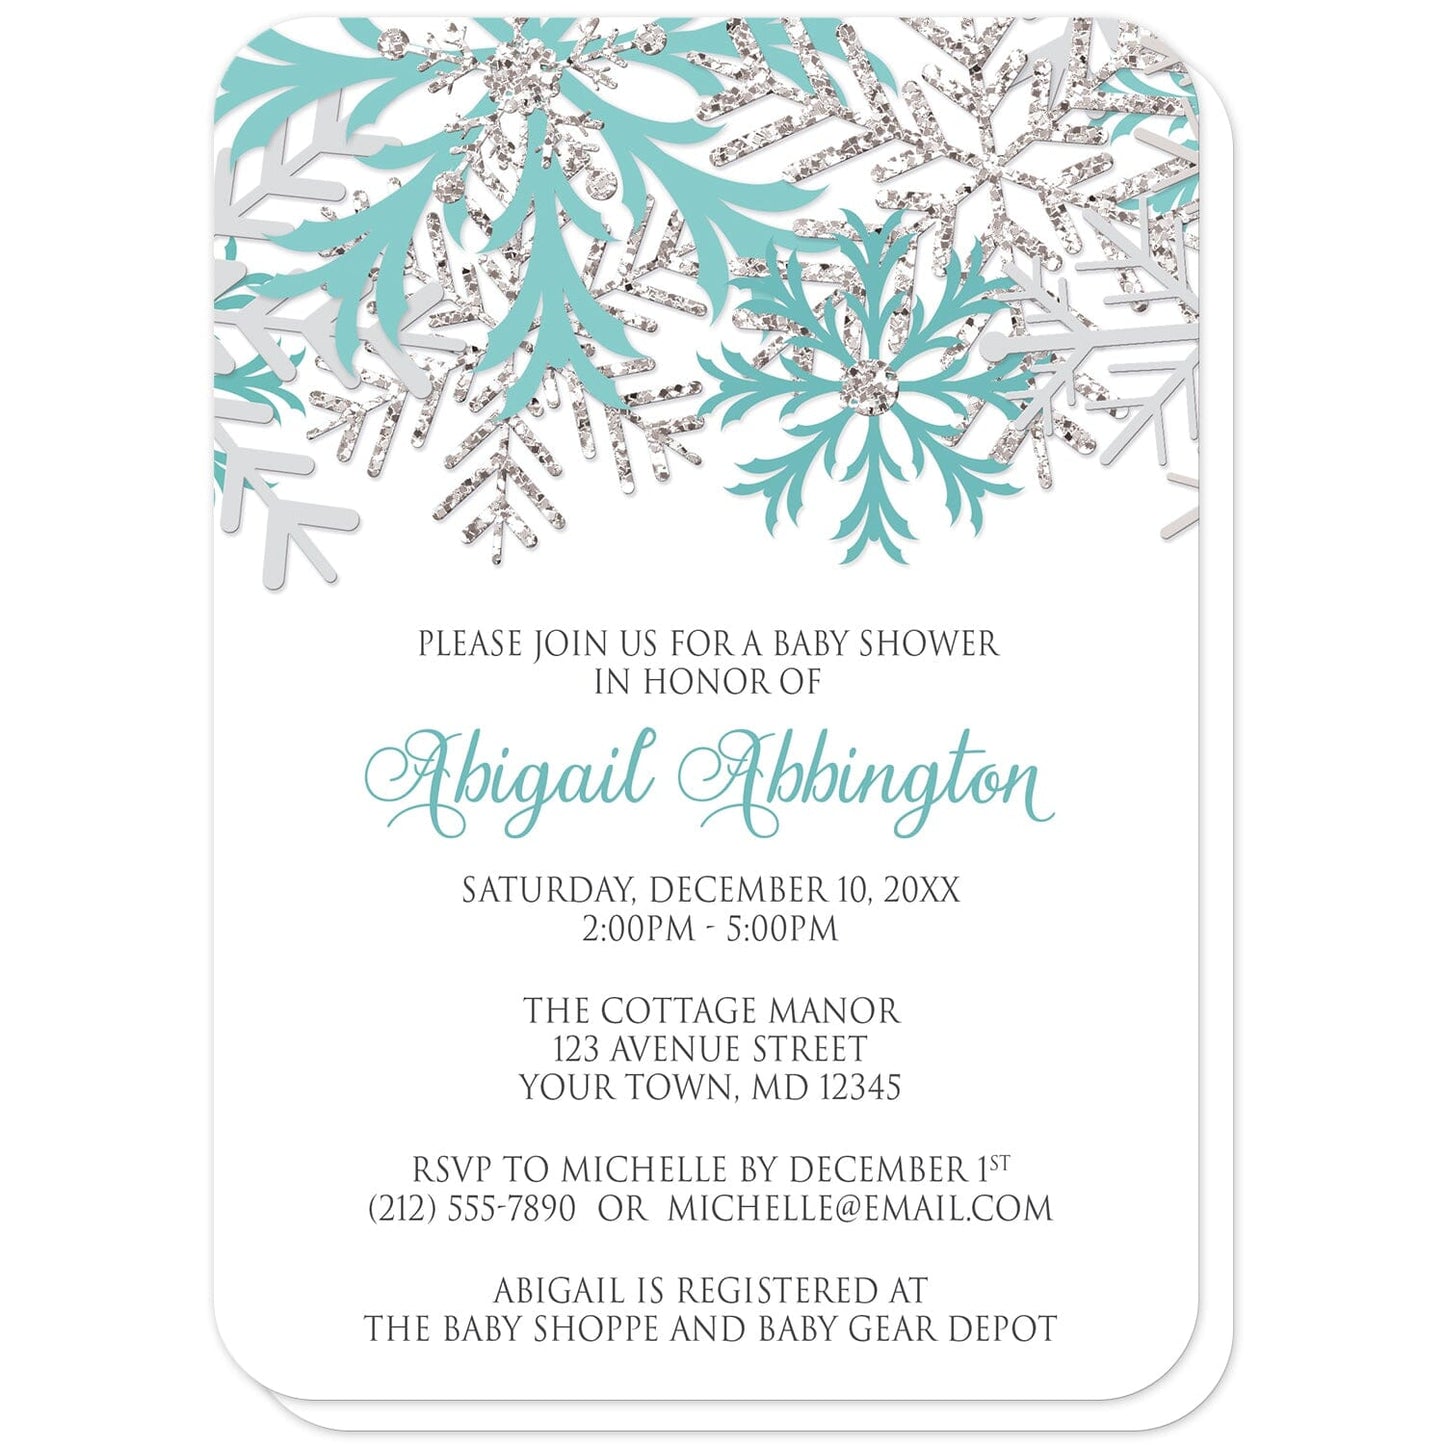 Winter Teal Silver Snowflake Baby Shower Invitations (with rounded corners) at Artistically Invited. Beautiful winter teal silver snowflake baby shower invitations designed with teal, light teal, silver-colored glitter-illustrated, and light gray snowflakes along the top over a white background. Your personalized baby shower celebration details are custom printed in teal and gray below the pretty snowflakes.